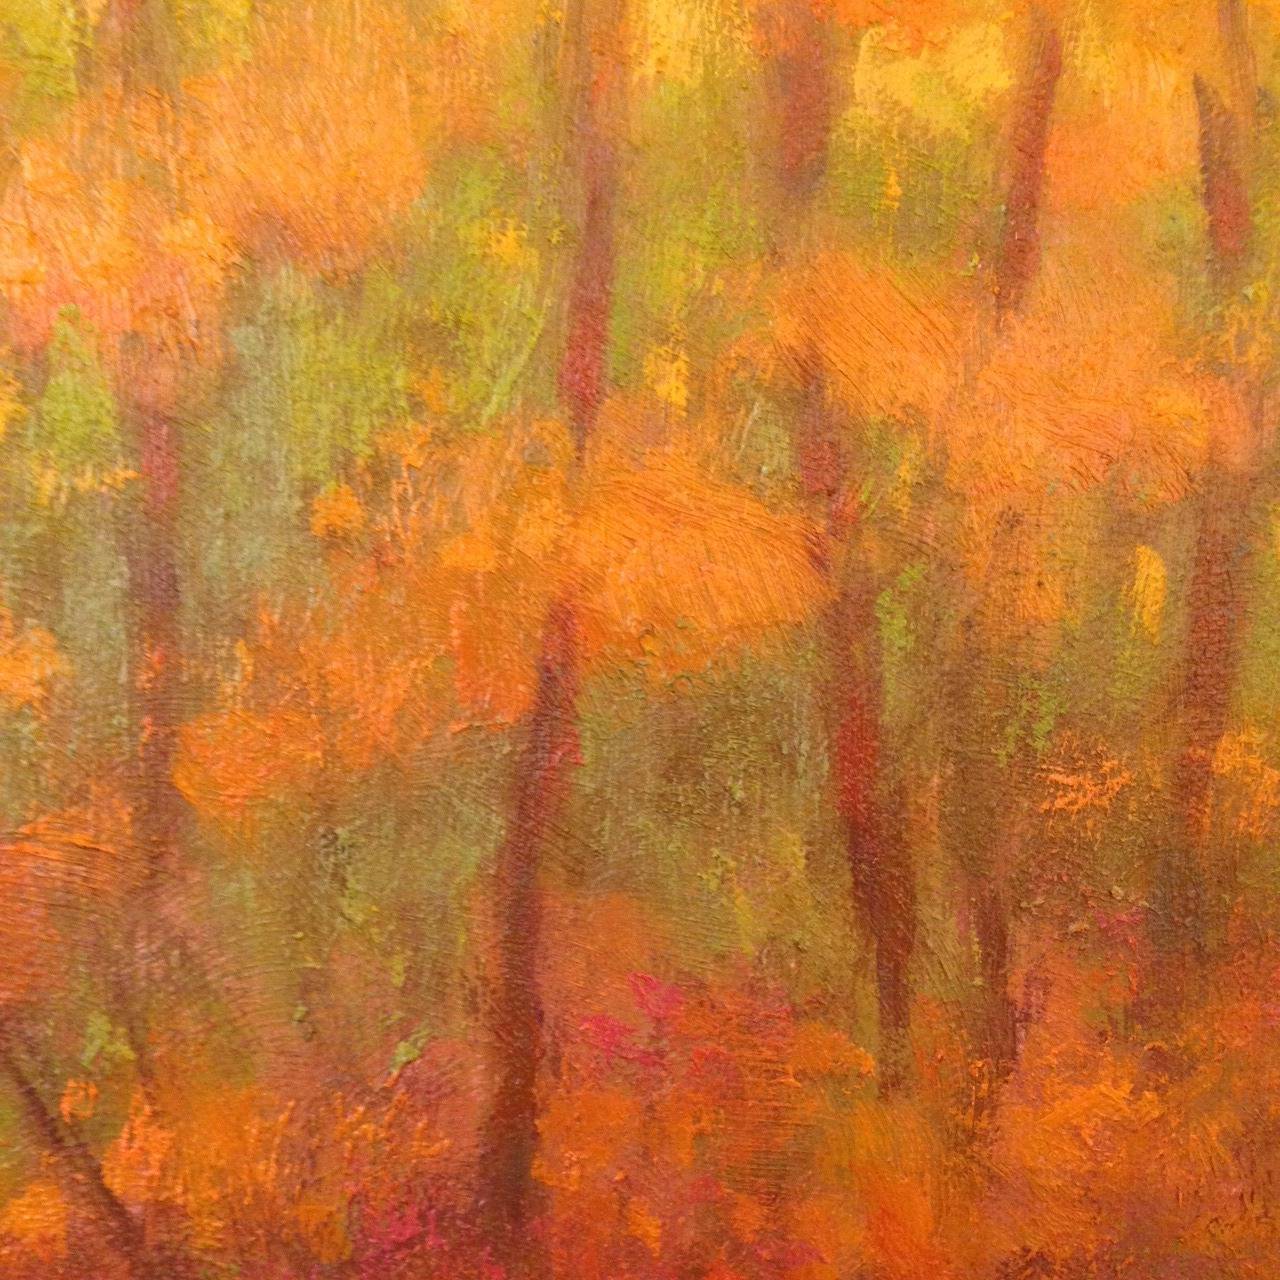 Autumn Sunset - American Impressionist Painting by Robert Longley